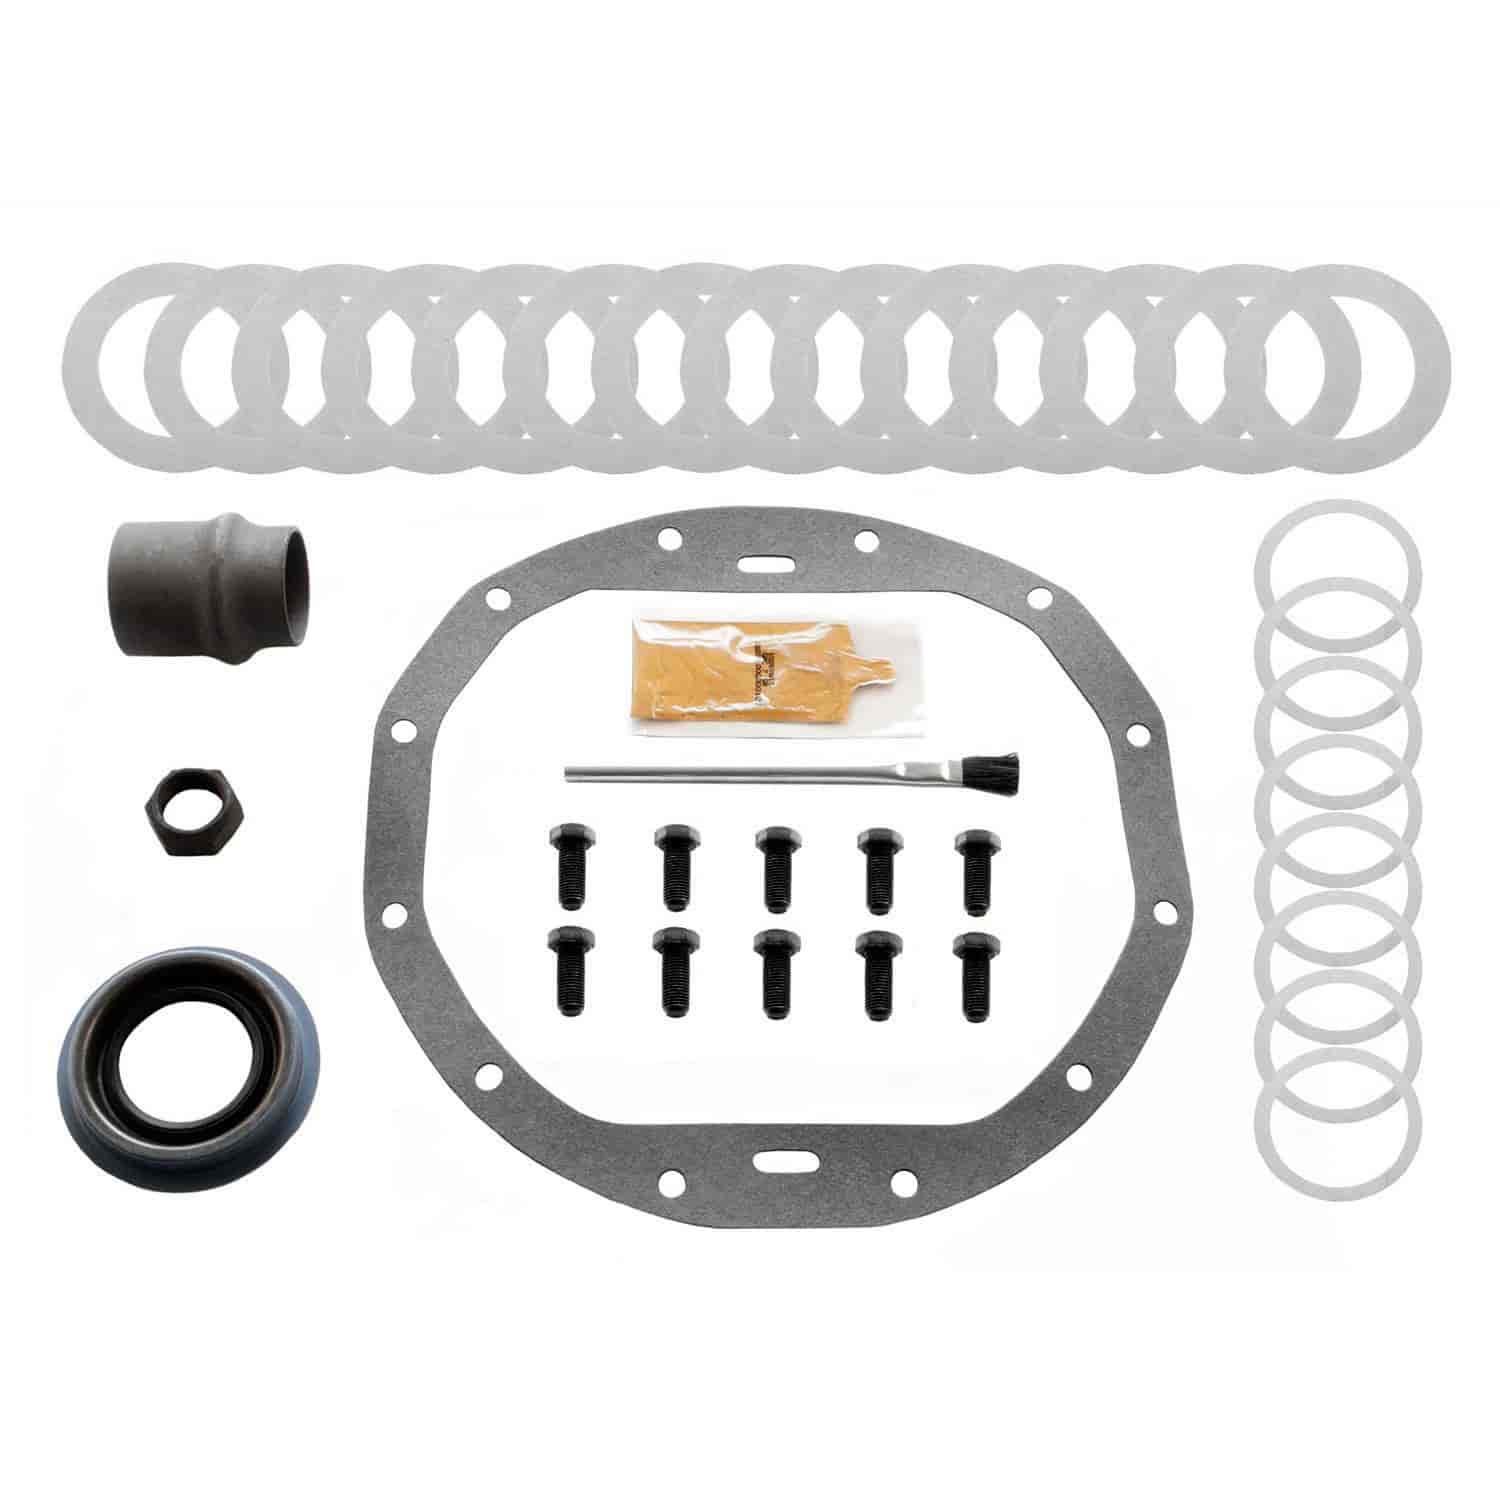 Excel; Half Ring And Pinion Install Kit; Fits GM 12 Bolt Car; Incl. Cover Gasket/Crush Sleeve/Pinion